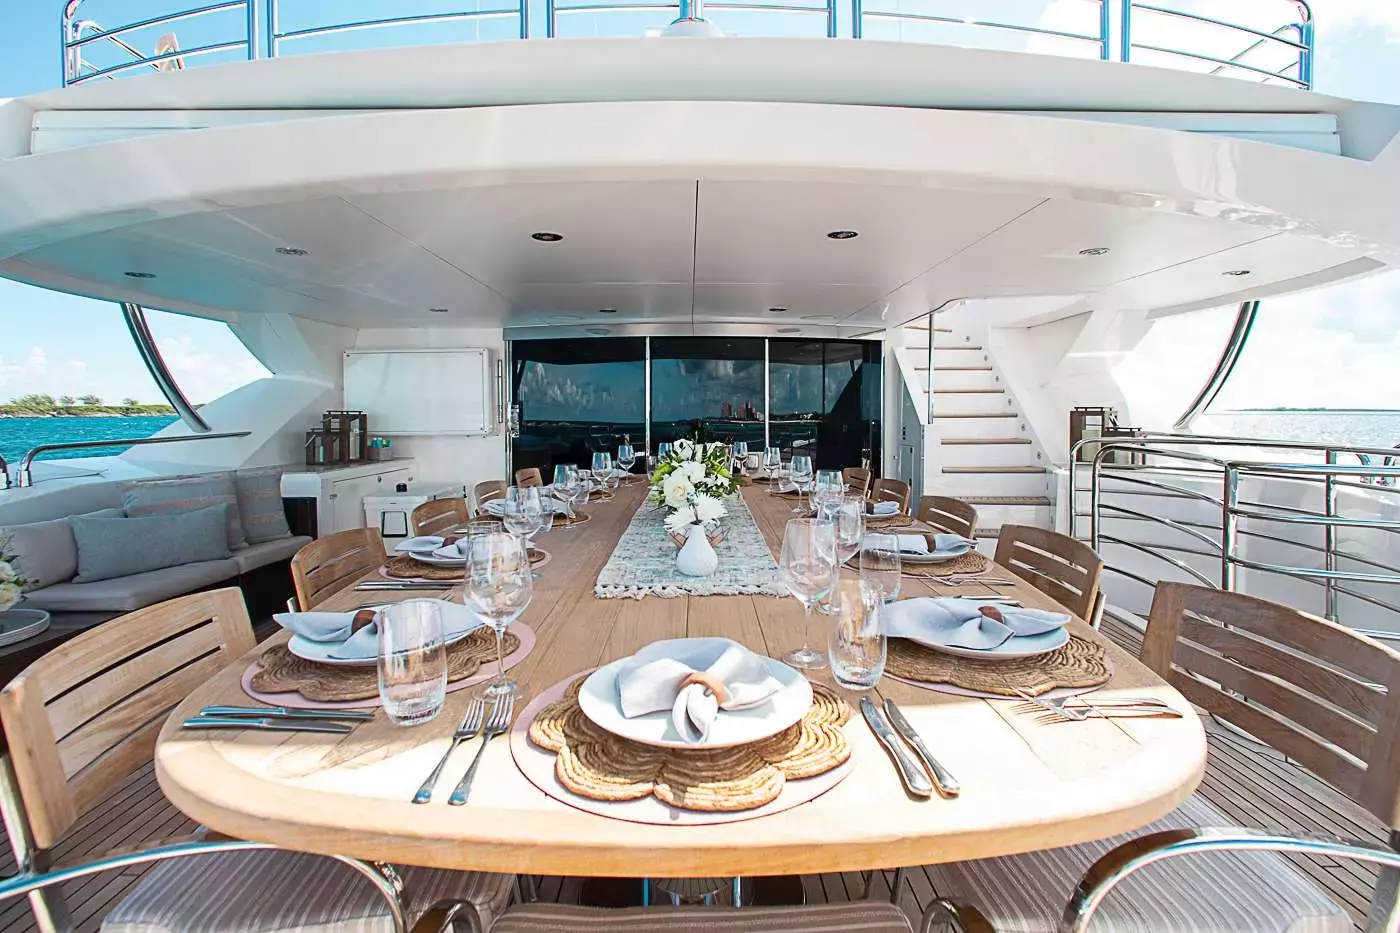 Acacia by Sunseeker - Top rates for a Charter of a private Superyacht in British Virgin Islands